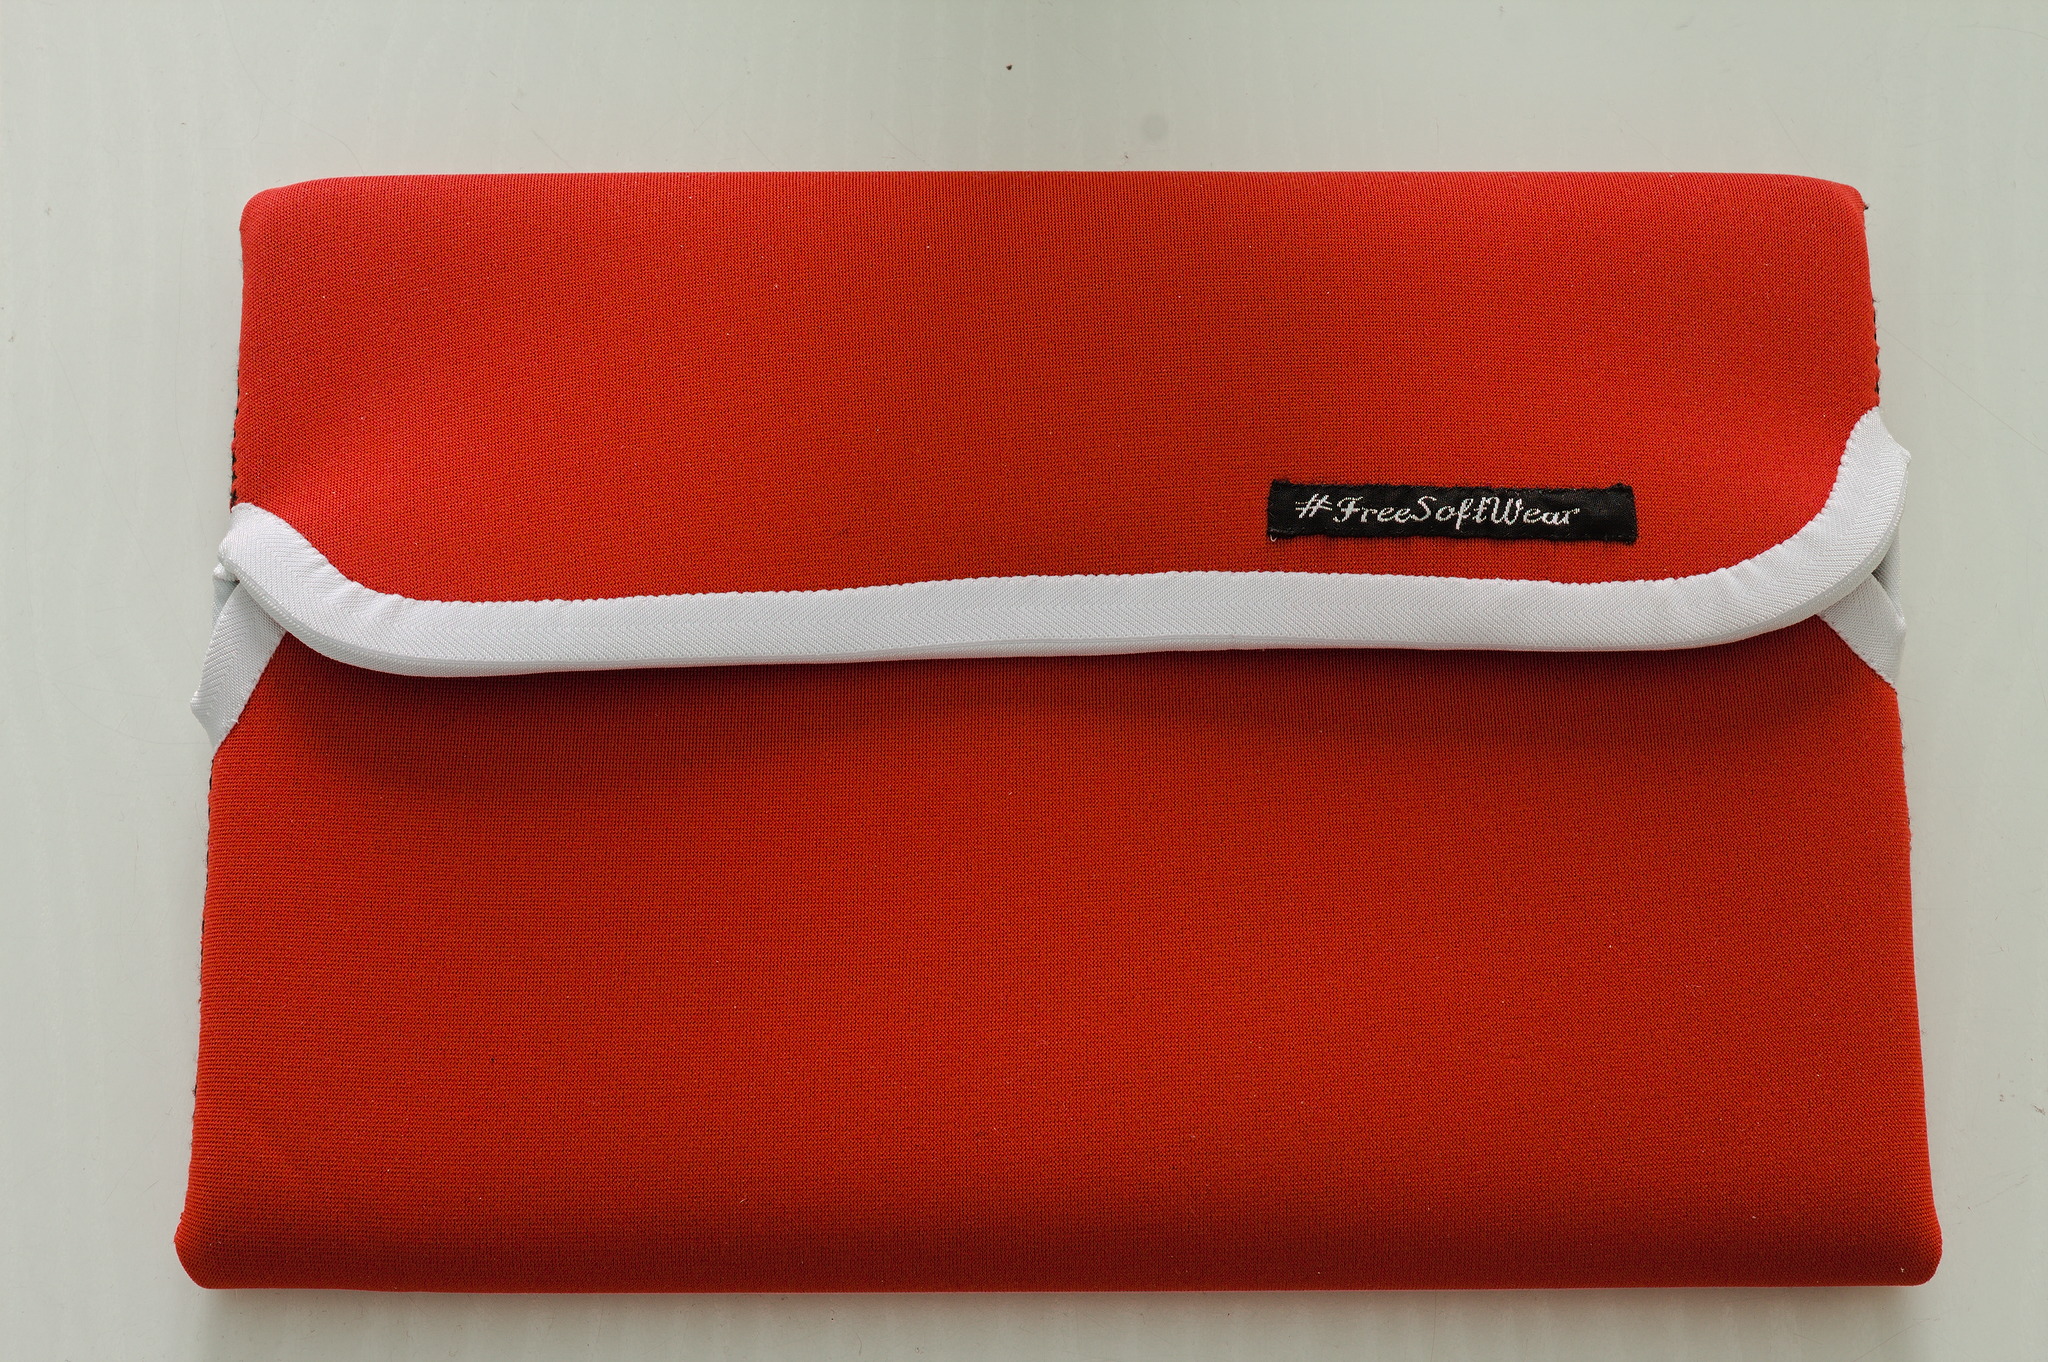 Picture of a red neoprene laptop sleeve, with two overlapping flaps with rounded edges for closure.